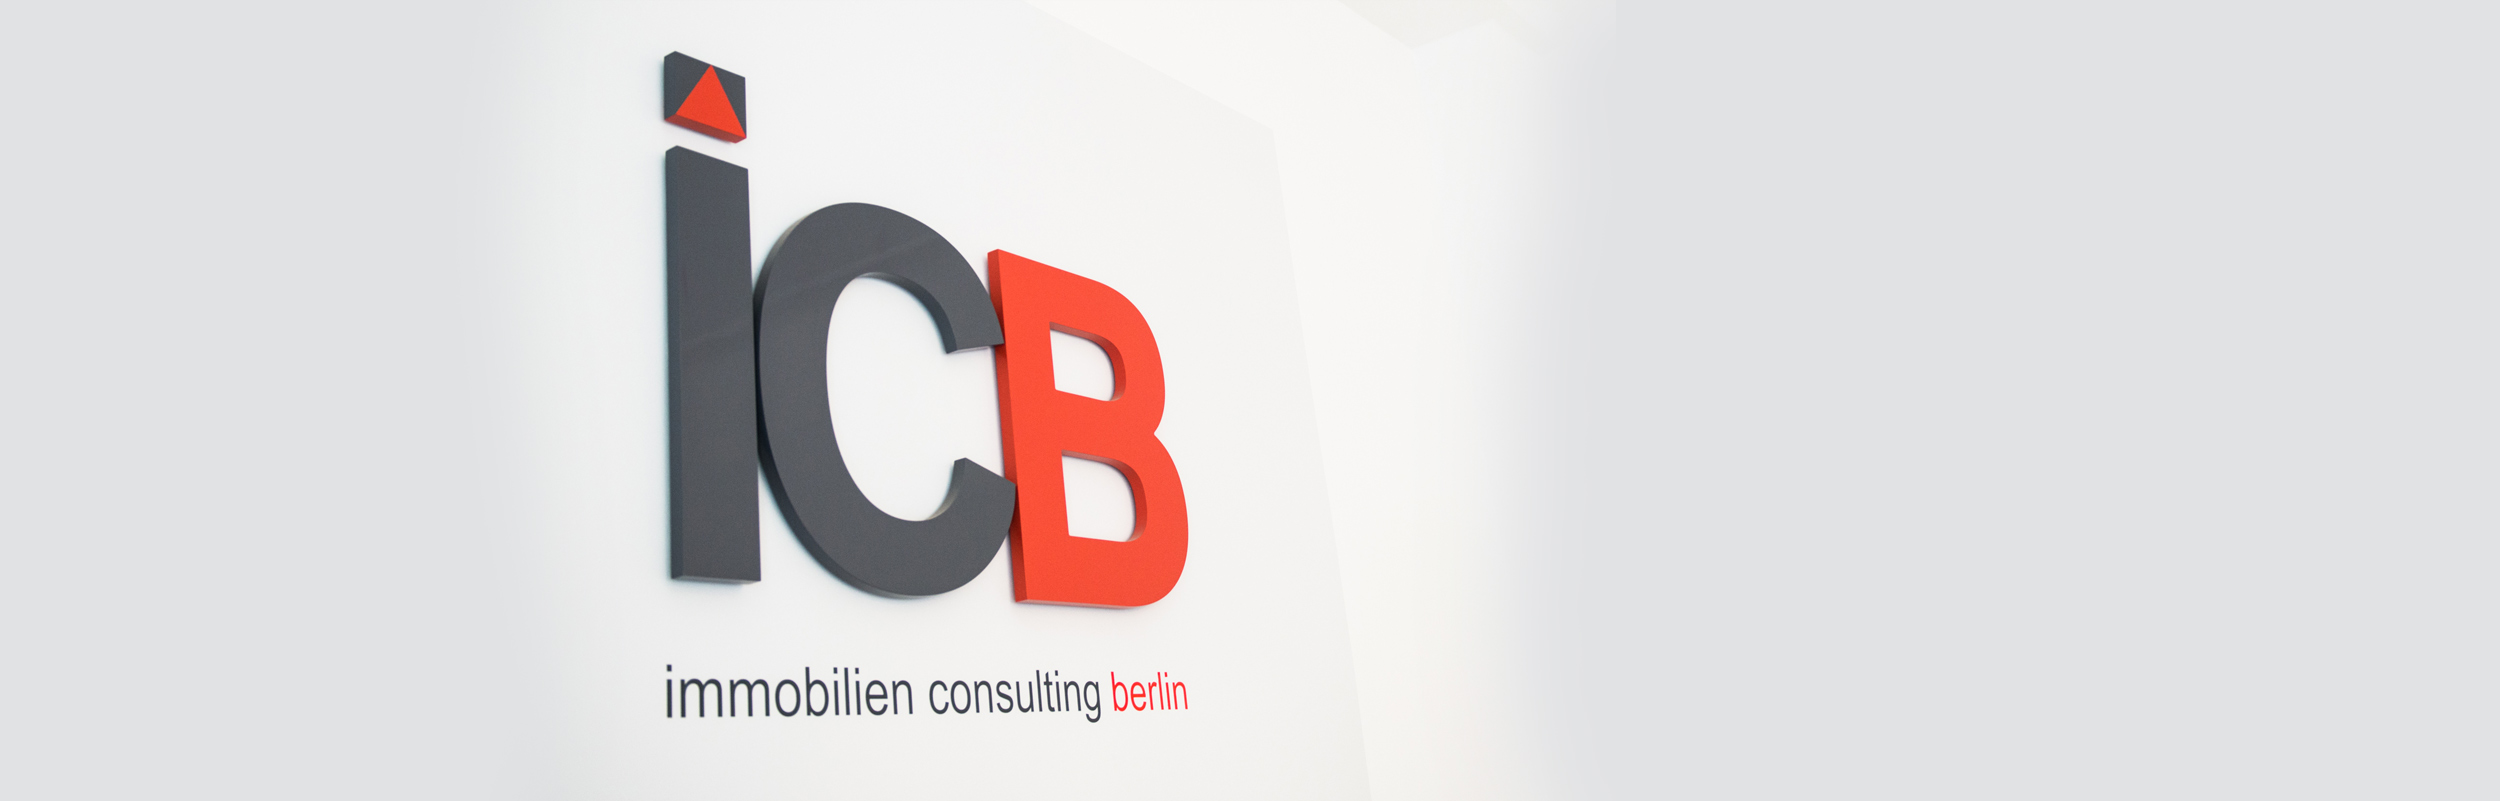 ICB - Immobilien Consulting Berlin - Header